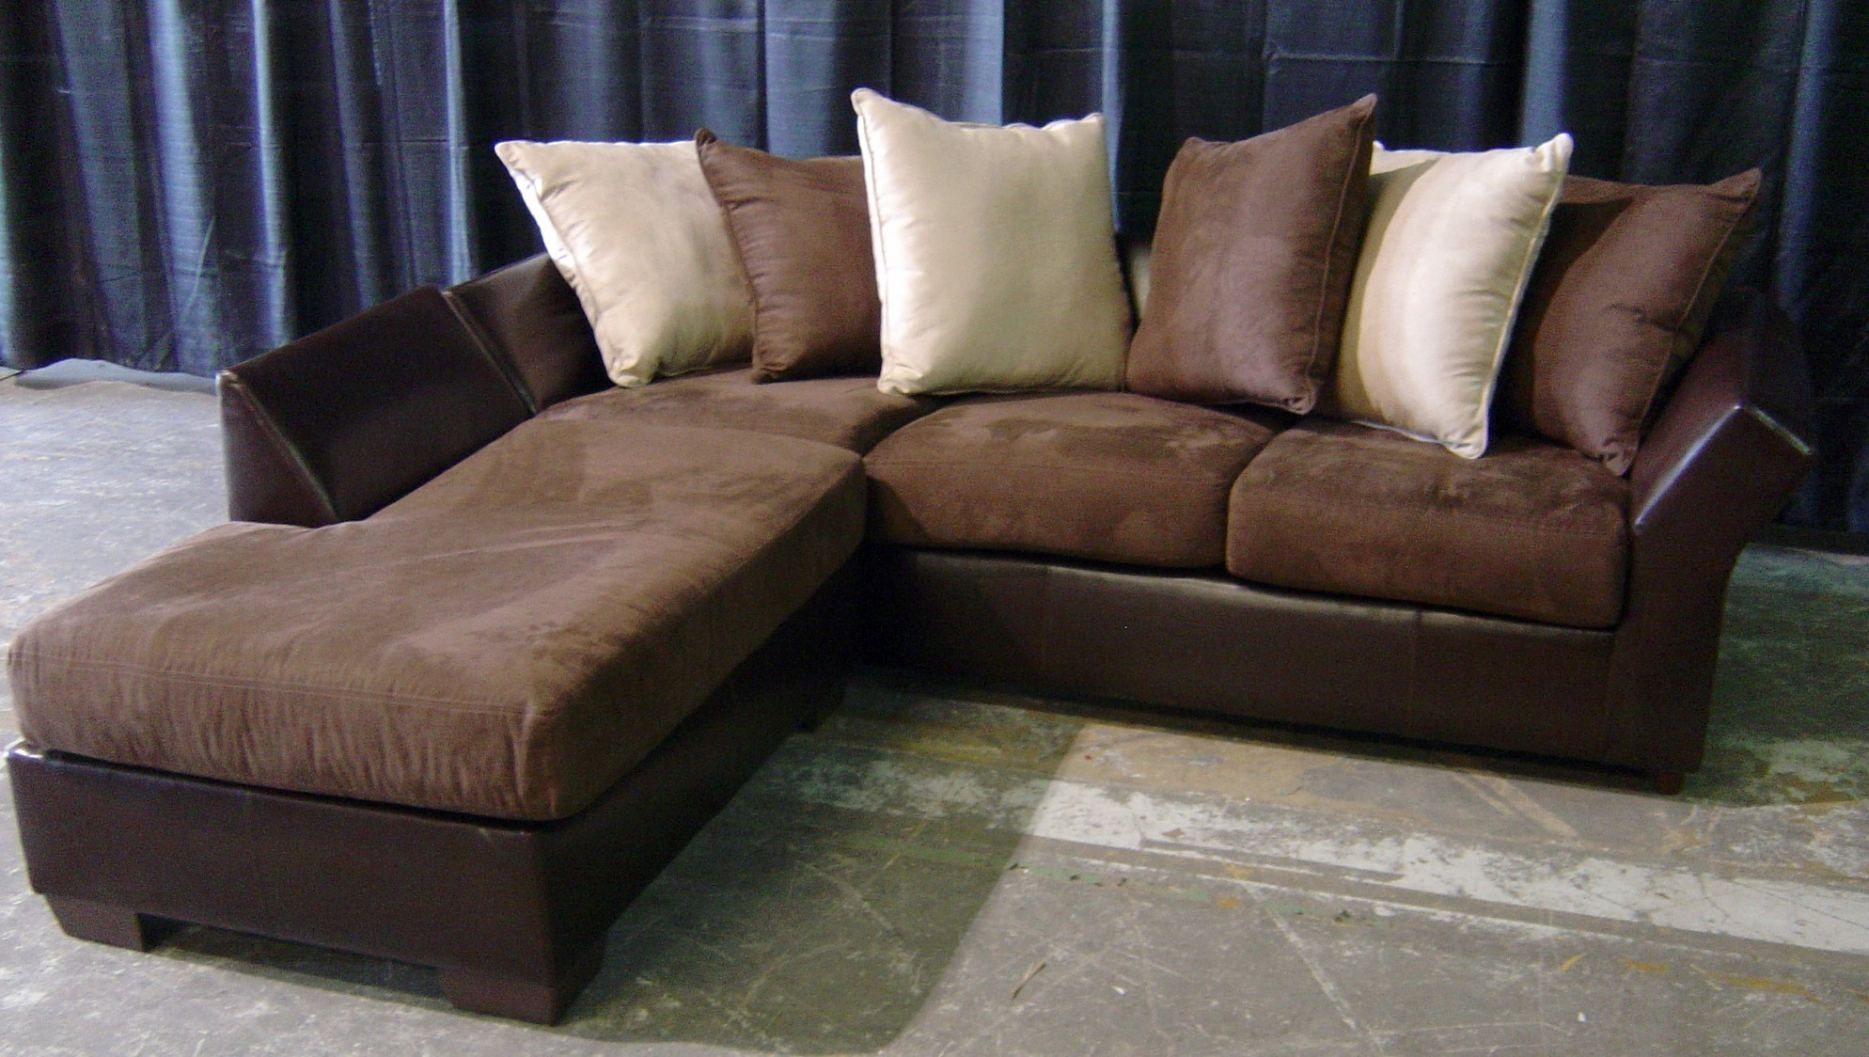 Faux Suede Couch | Tirtagucipool Throughout Faux Suede Sofas (View 8 of 10)